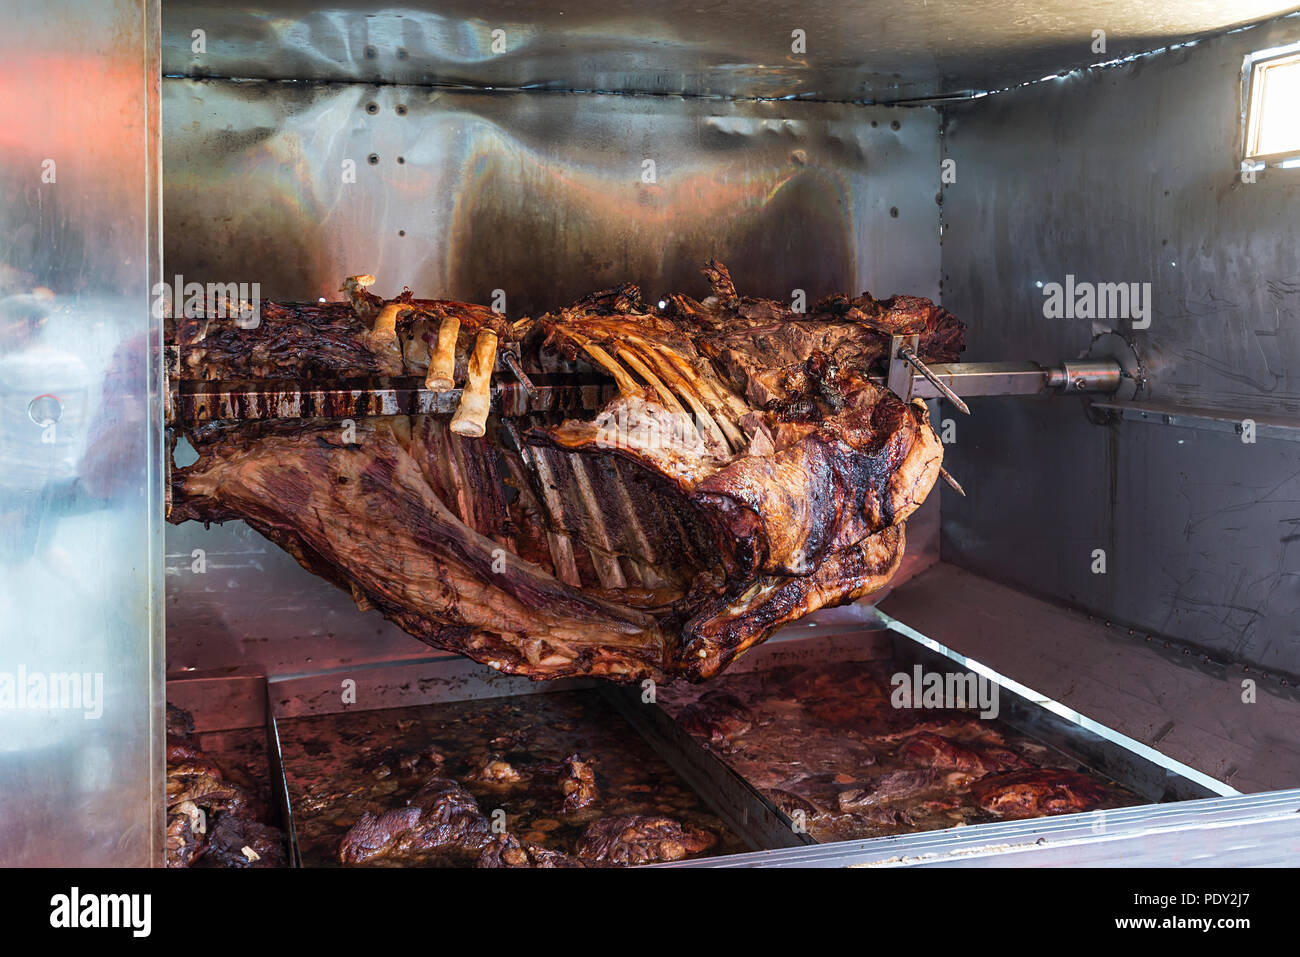 Roasted ox on a skewer, portions cut off in holding pans, Bavaria, Germany Stock Photo